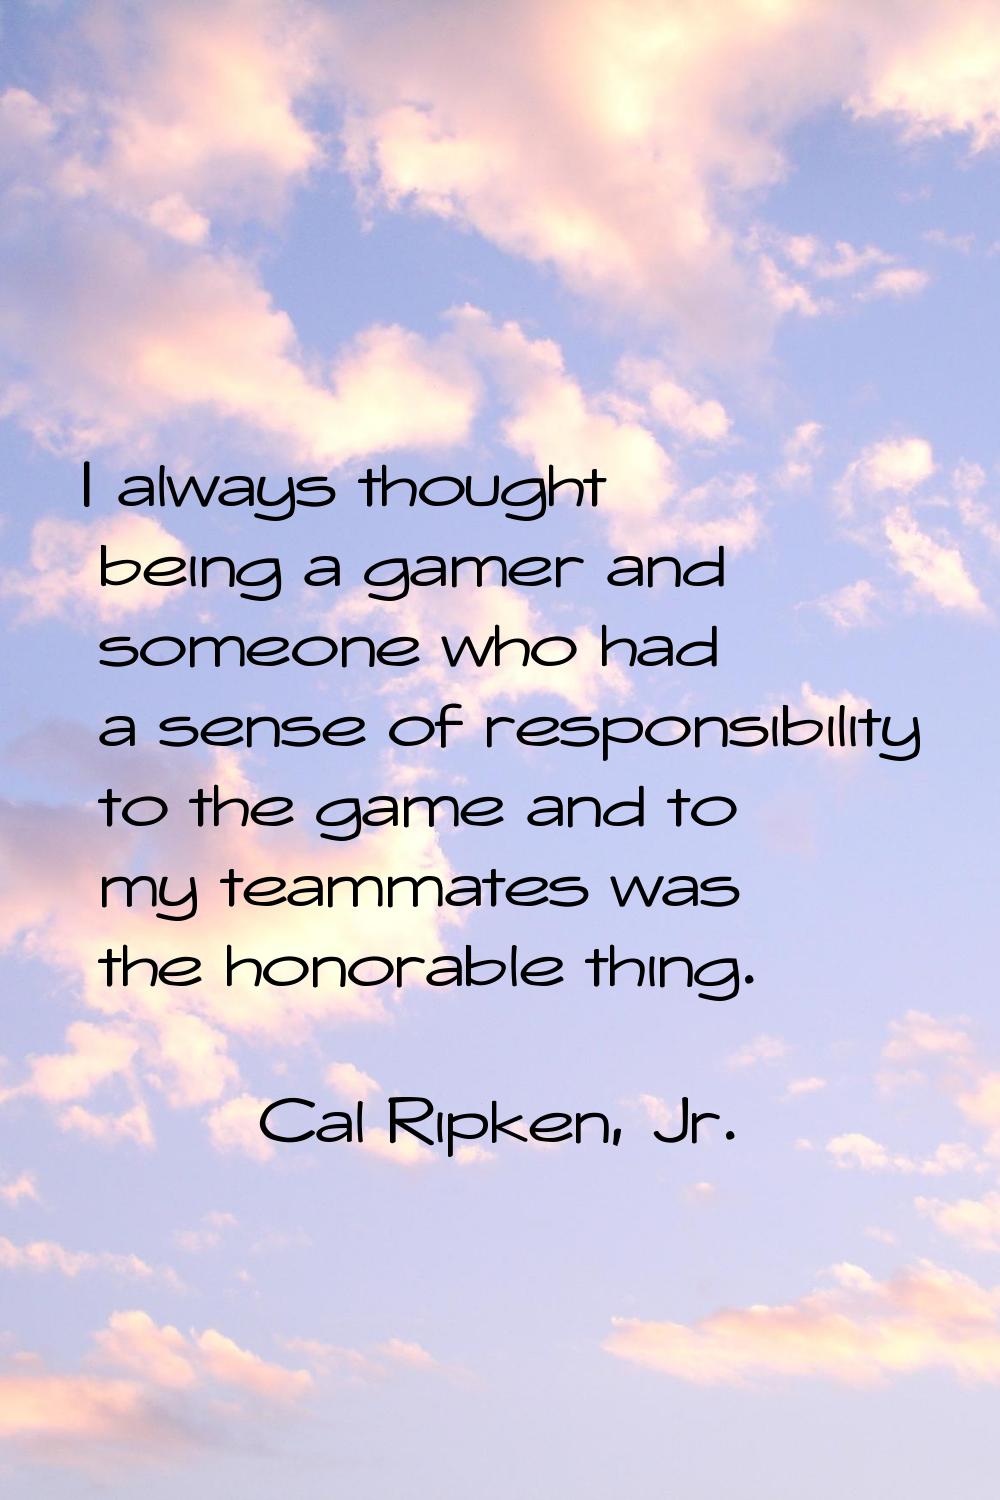 I always thought being a gamer and someone who had a sense of responsibility to the game and to my 